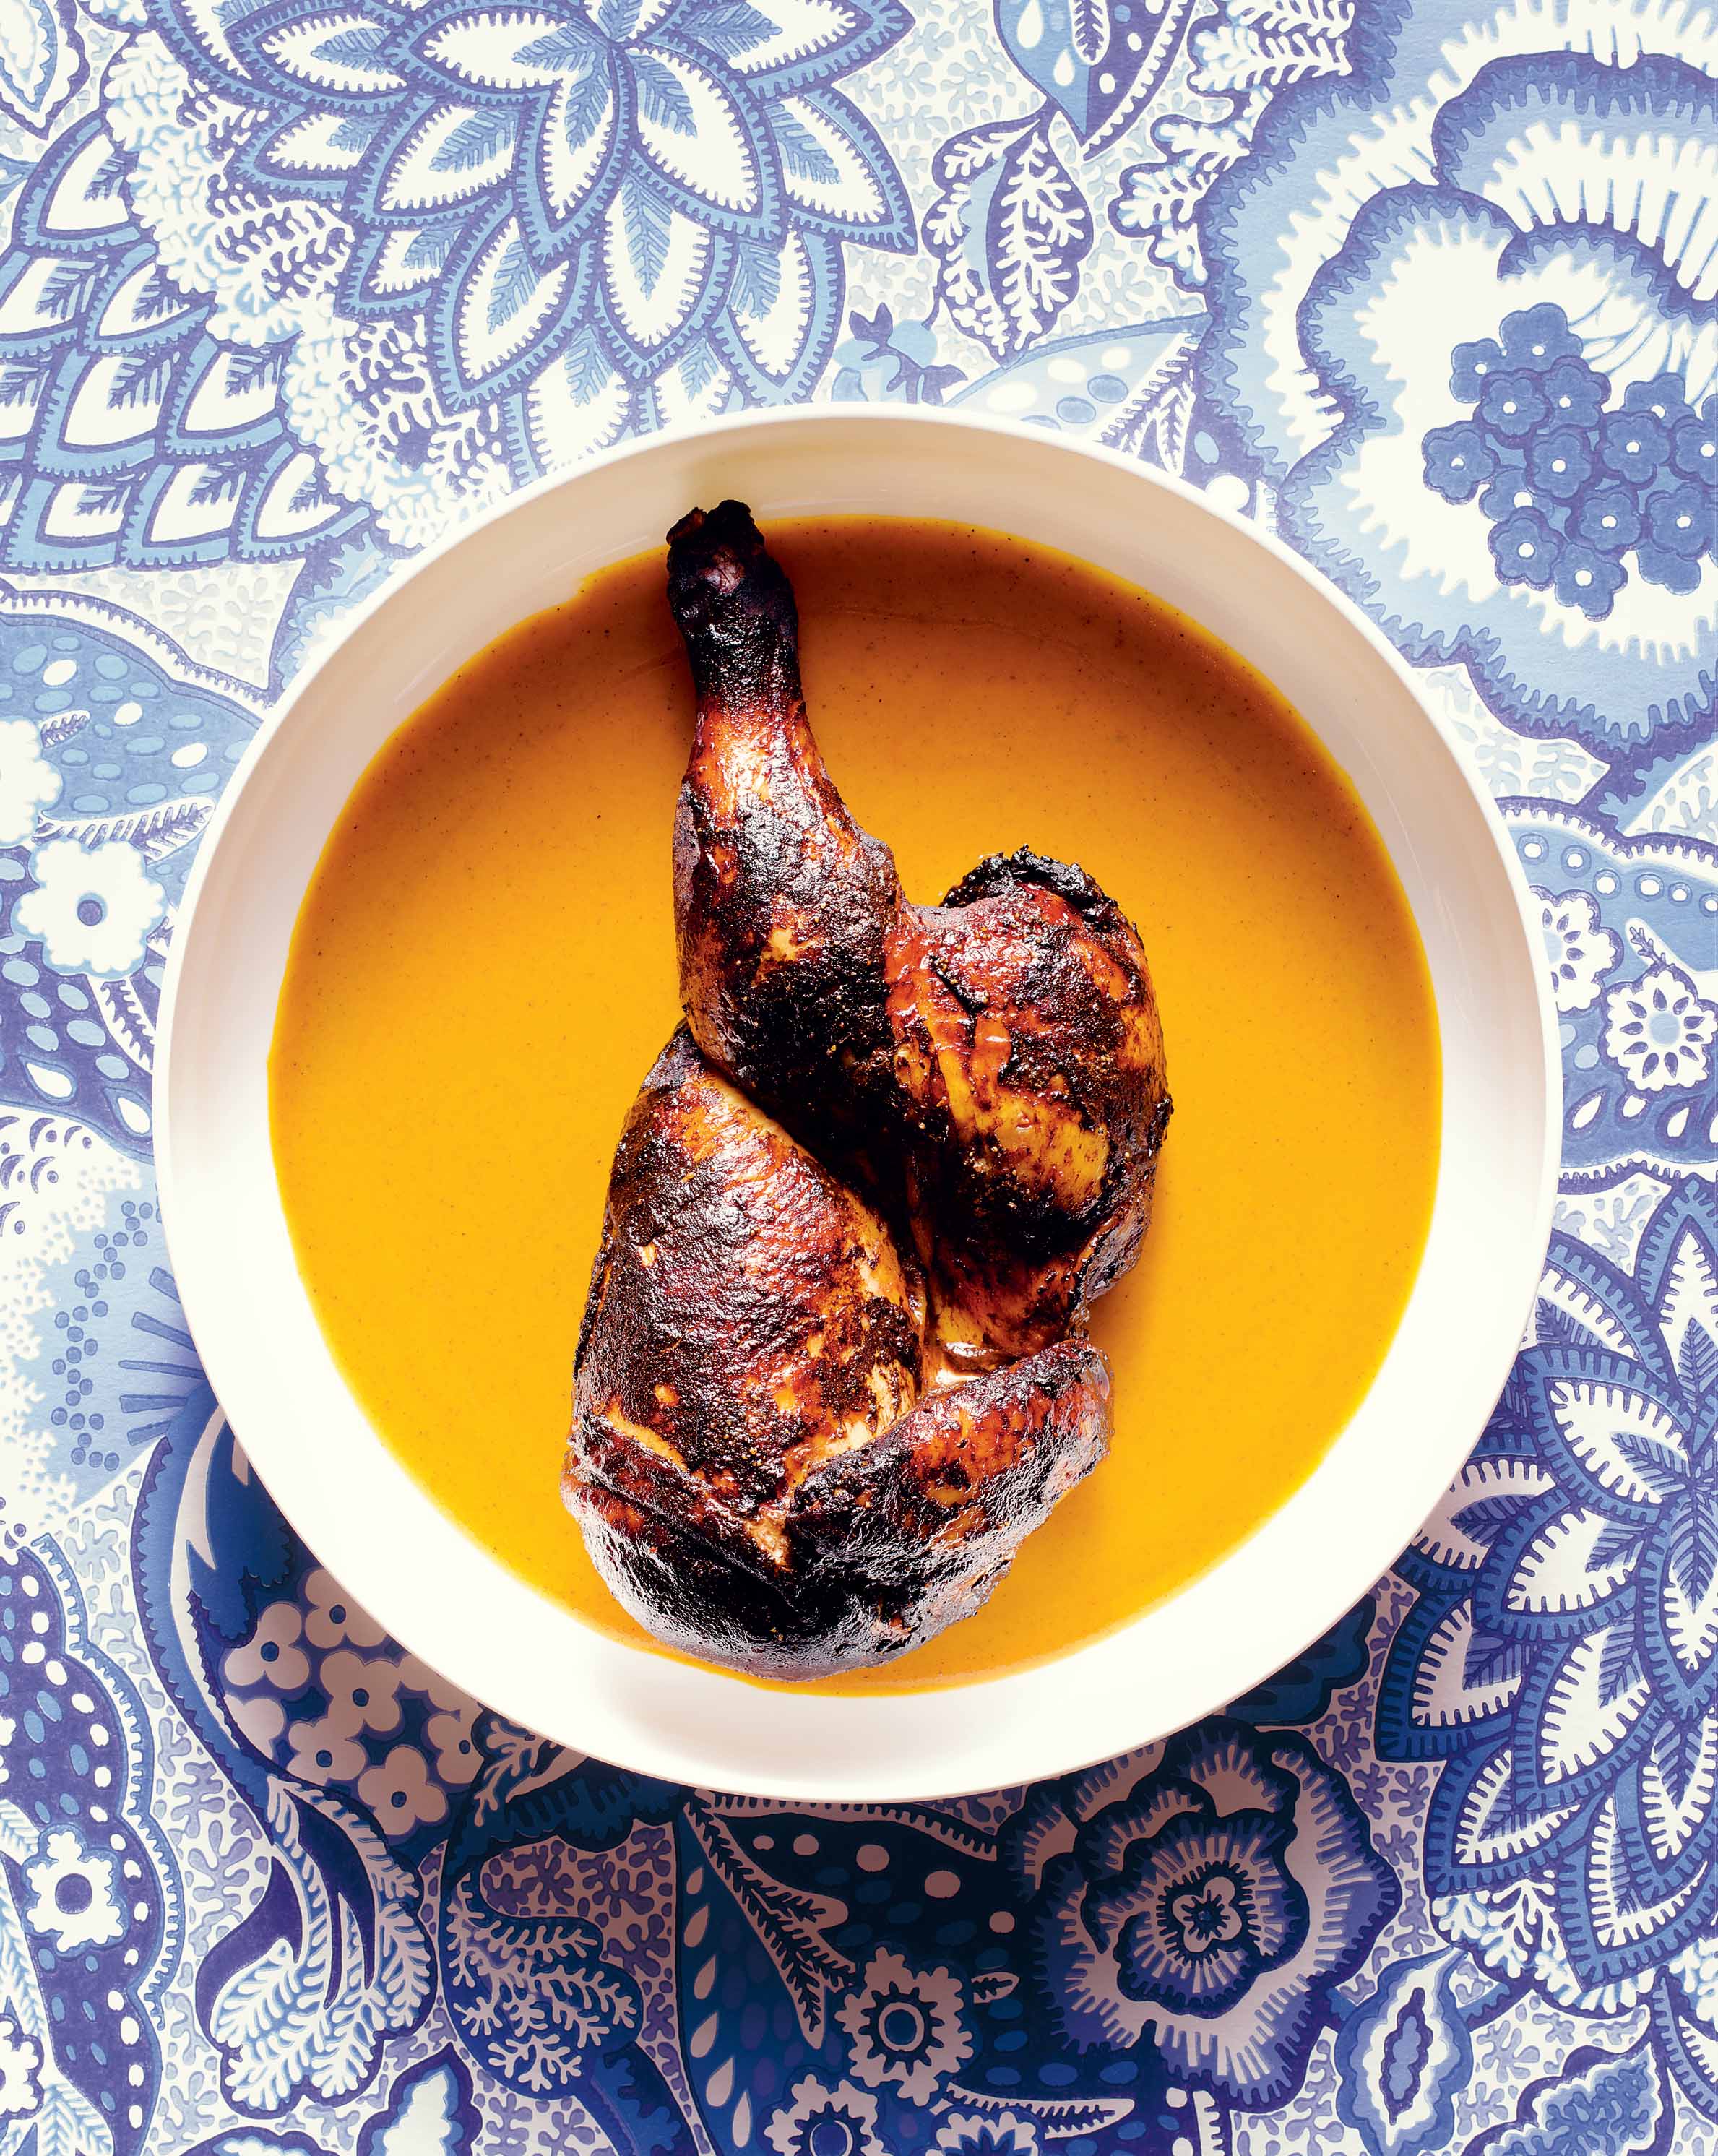 Barbecued chicken with yellow mustard sauce